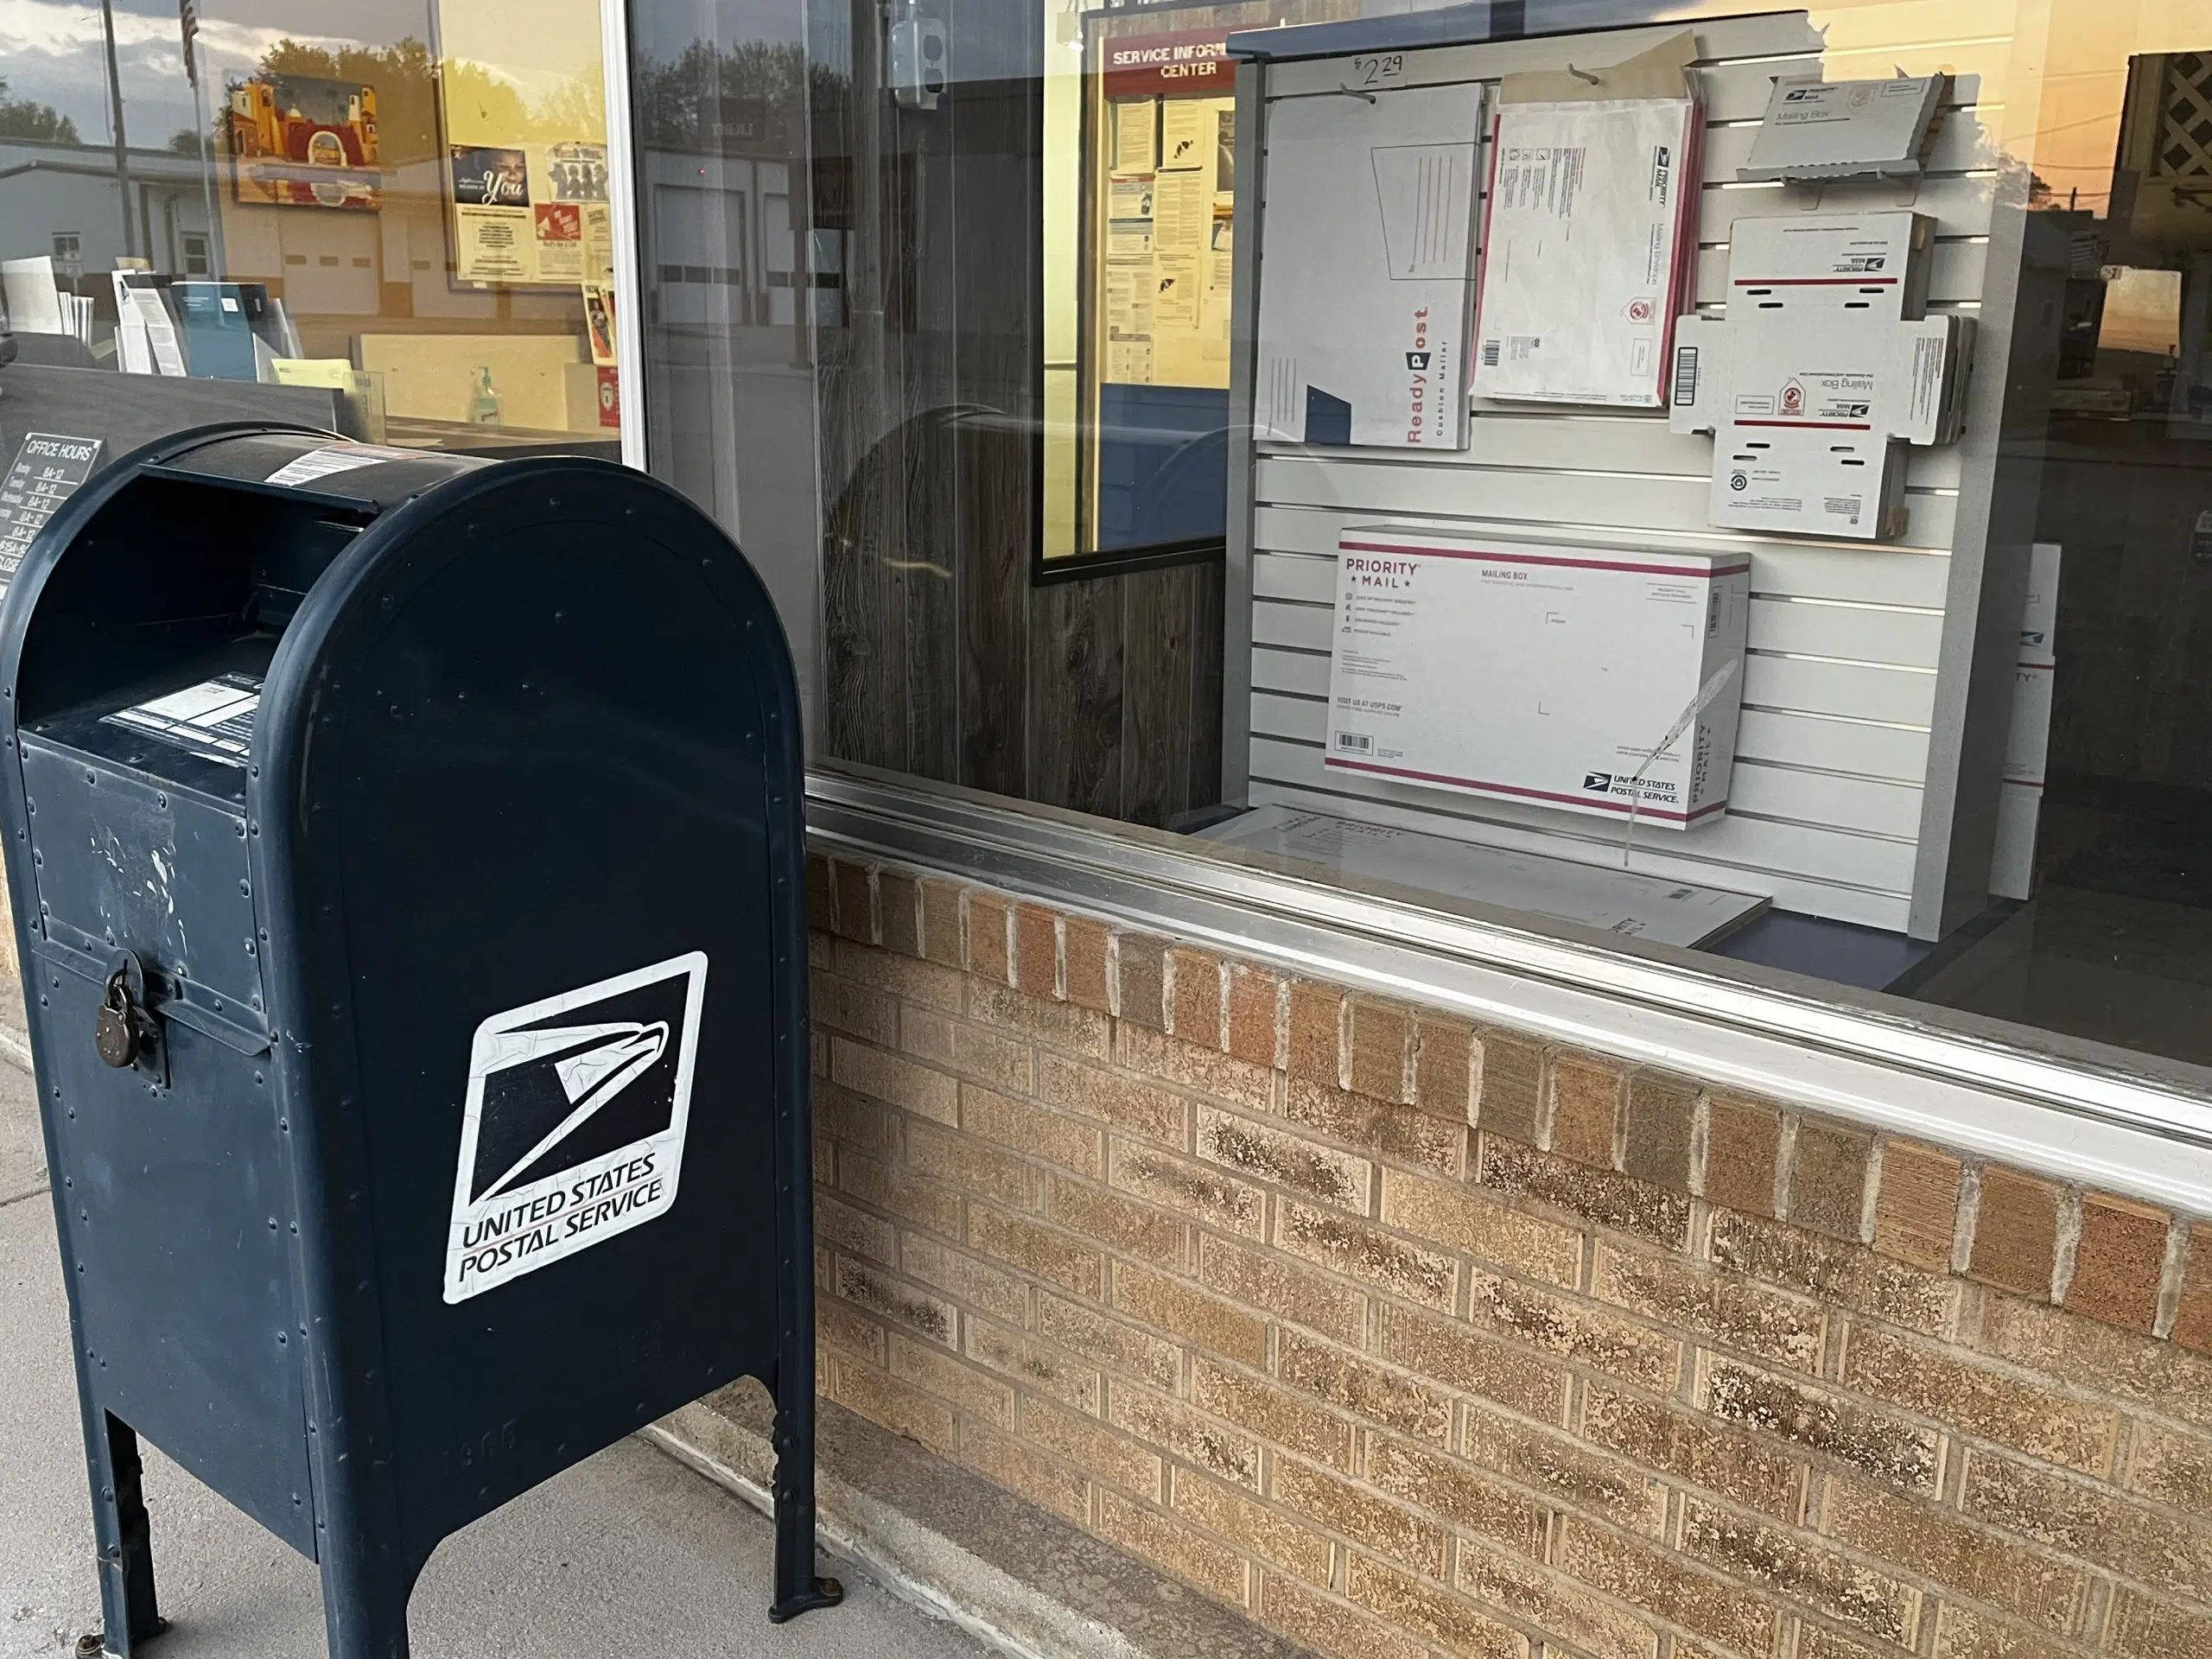 Olpe Mayor: Postal Service will bring permanent post office back to town after temporary closure May 14